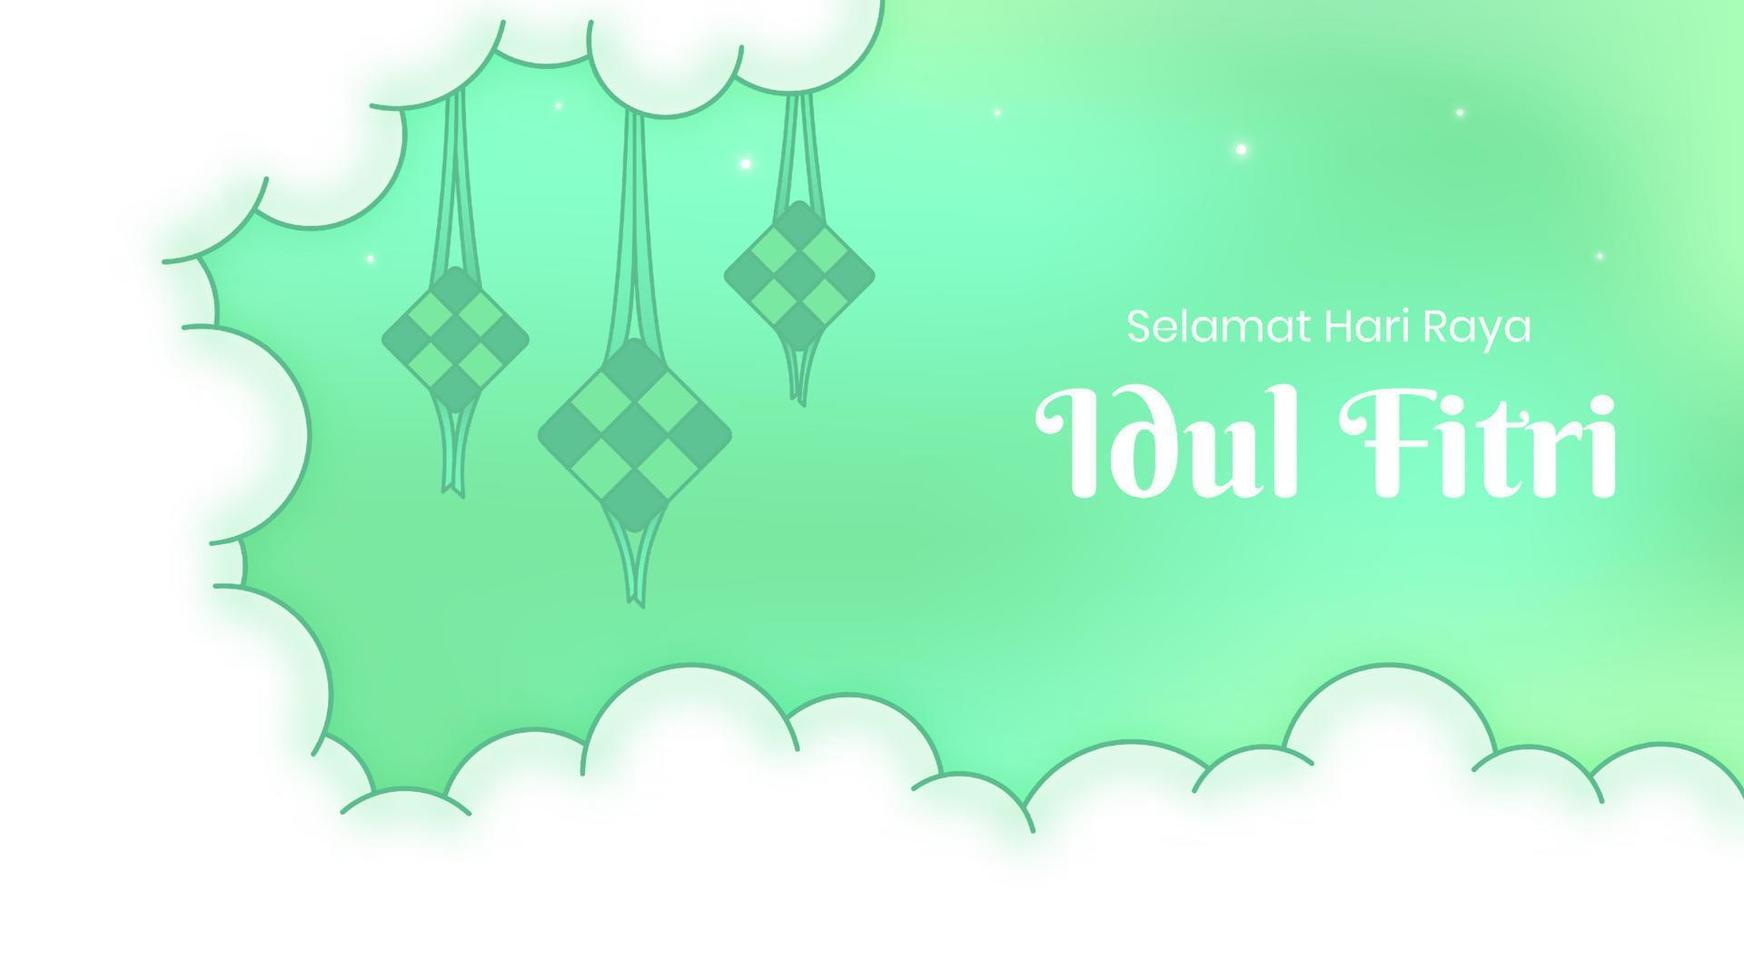 Gradient Idul Fitri landscape background with flat style vector